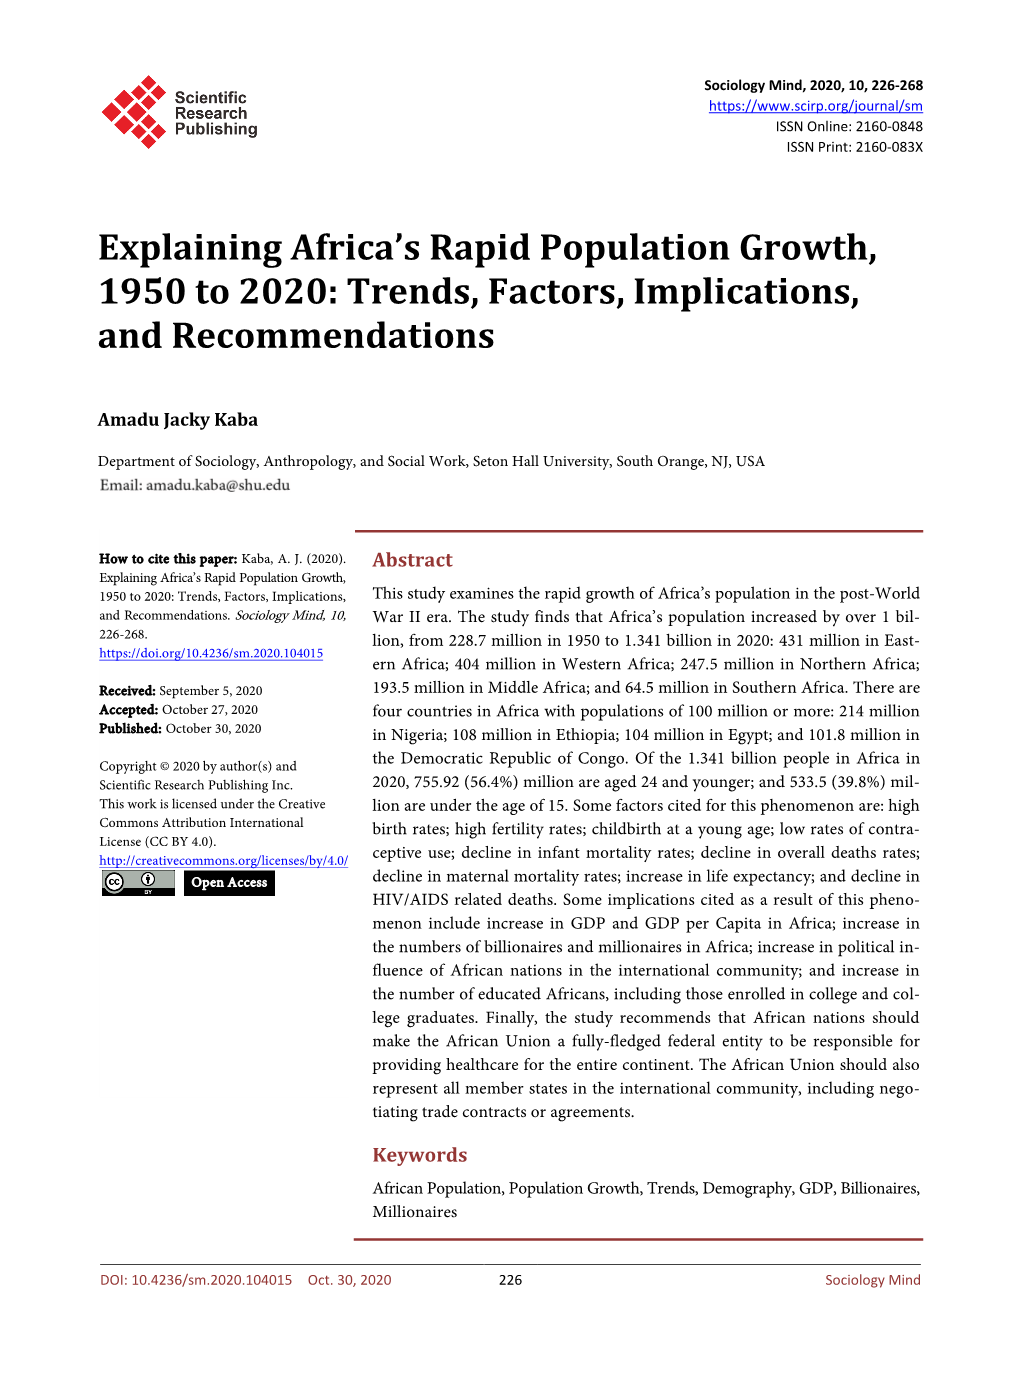 Explaining Africa's Rapid Population Growth, 1950 to 2020: Trends